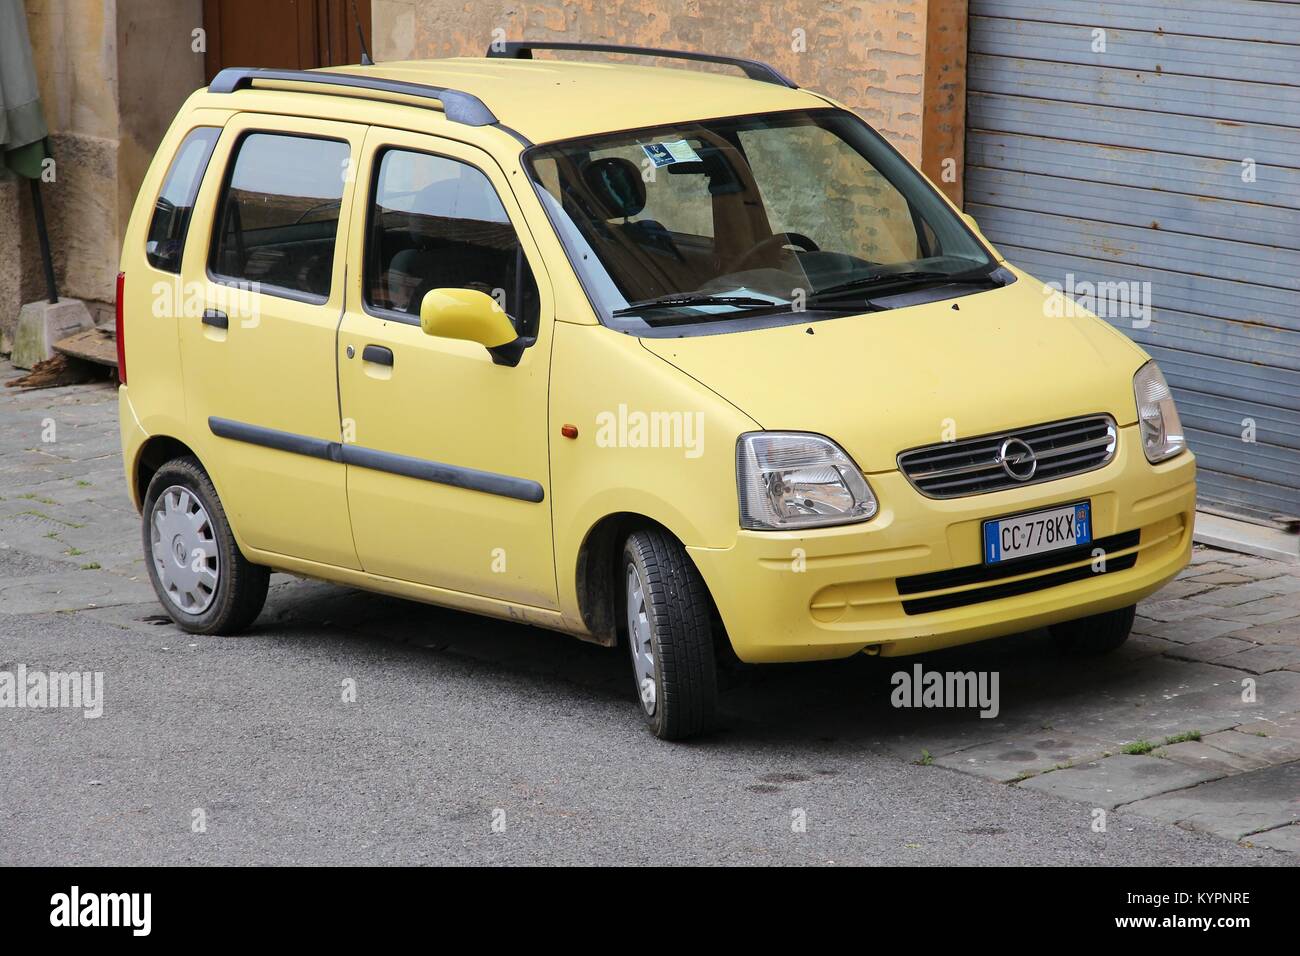 SIENA, ITALY - MAY 3, 2015: Opel Agila car parked in Siena, Italy. Agila was manufactured in years 2000-2015. Stock Photo